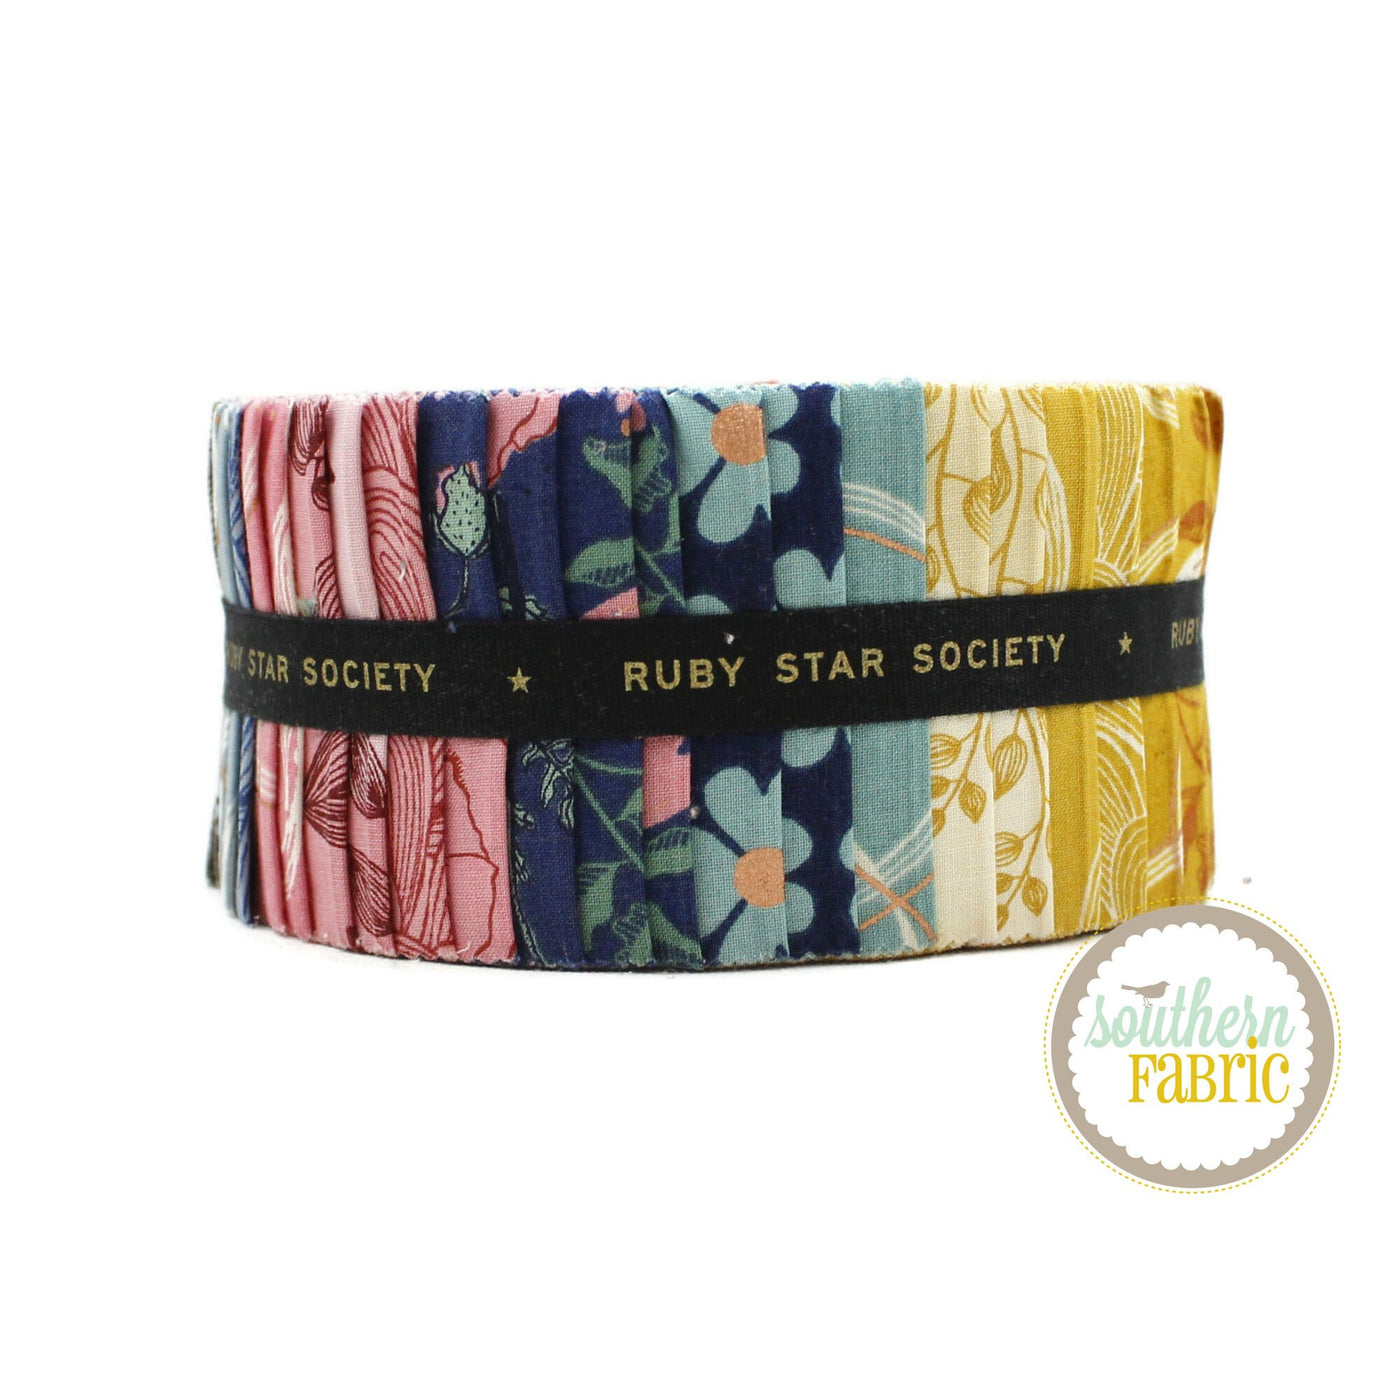 Unruly Nature Jelly Roll (40 pcs) by Jen Hewett for Ruby Star Society + Moda (RS6009JR)